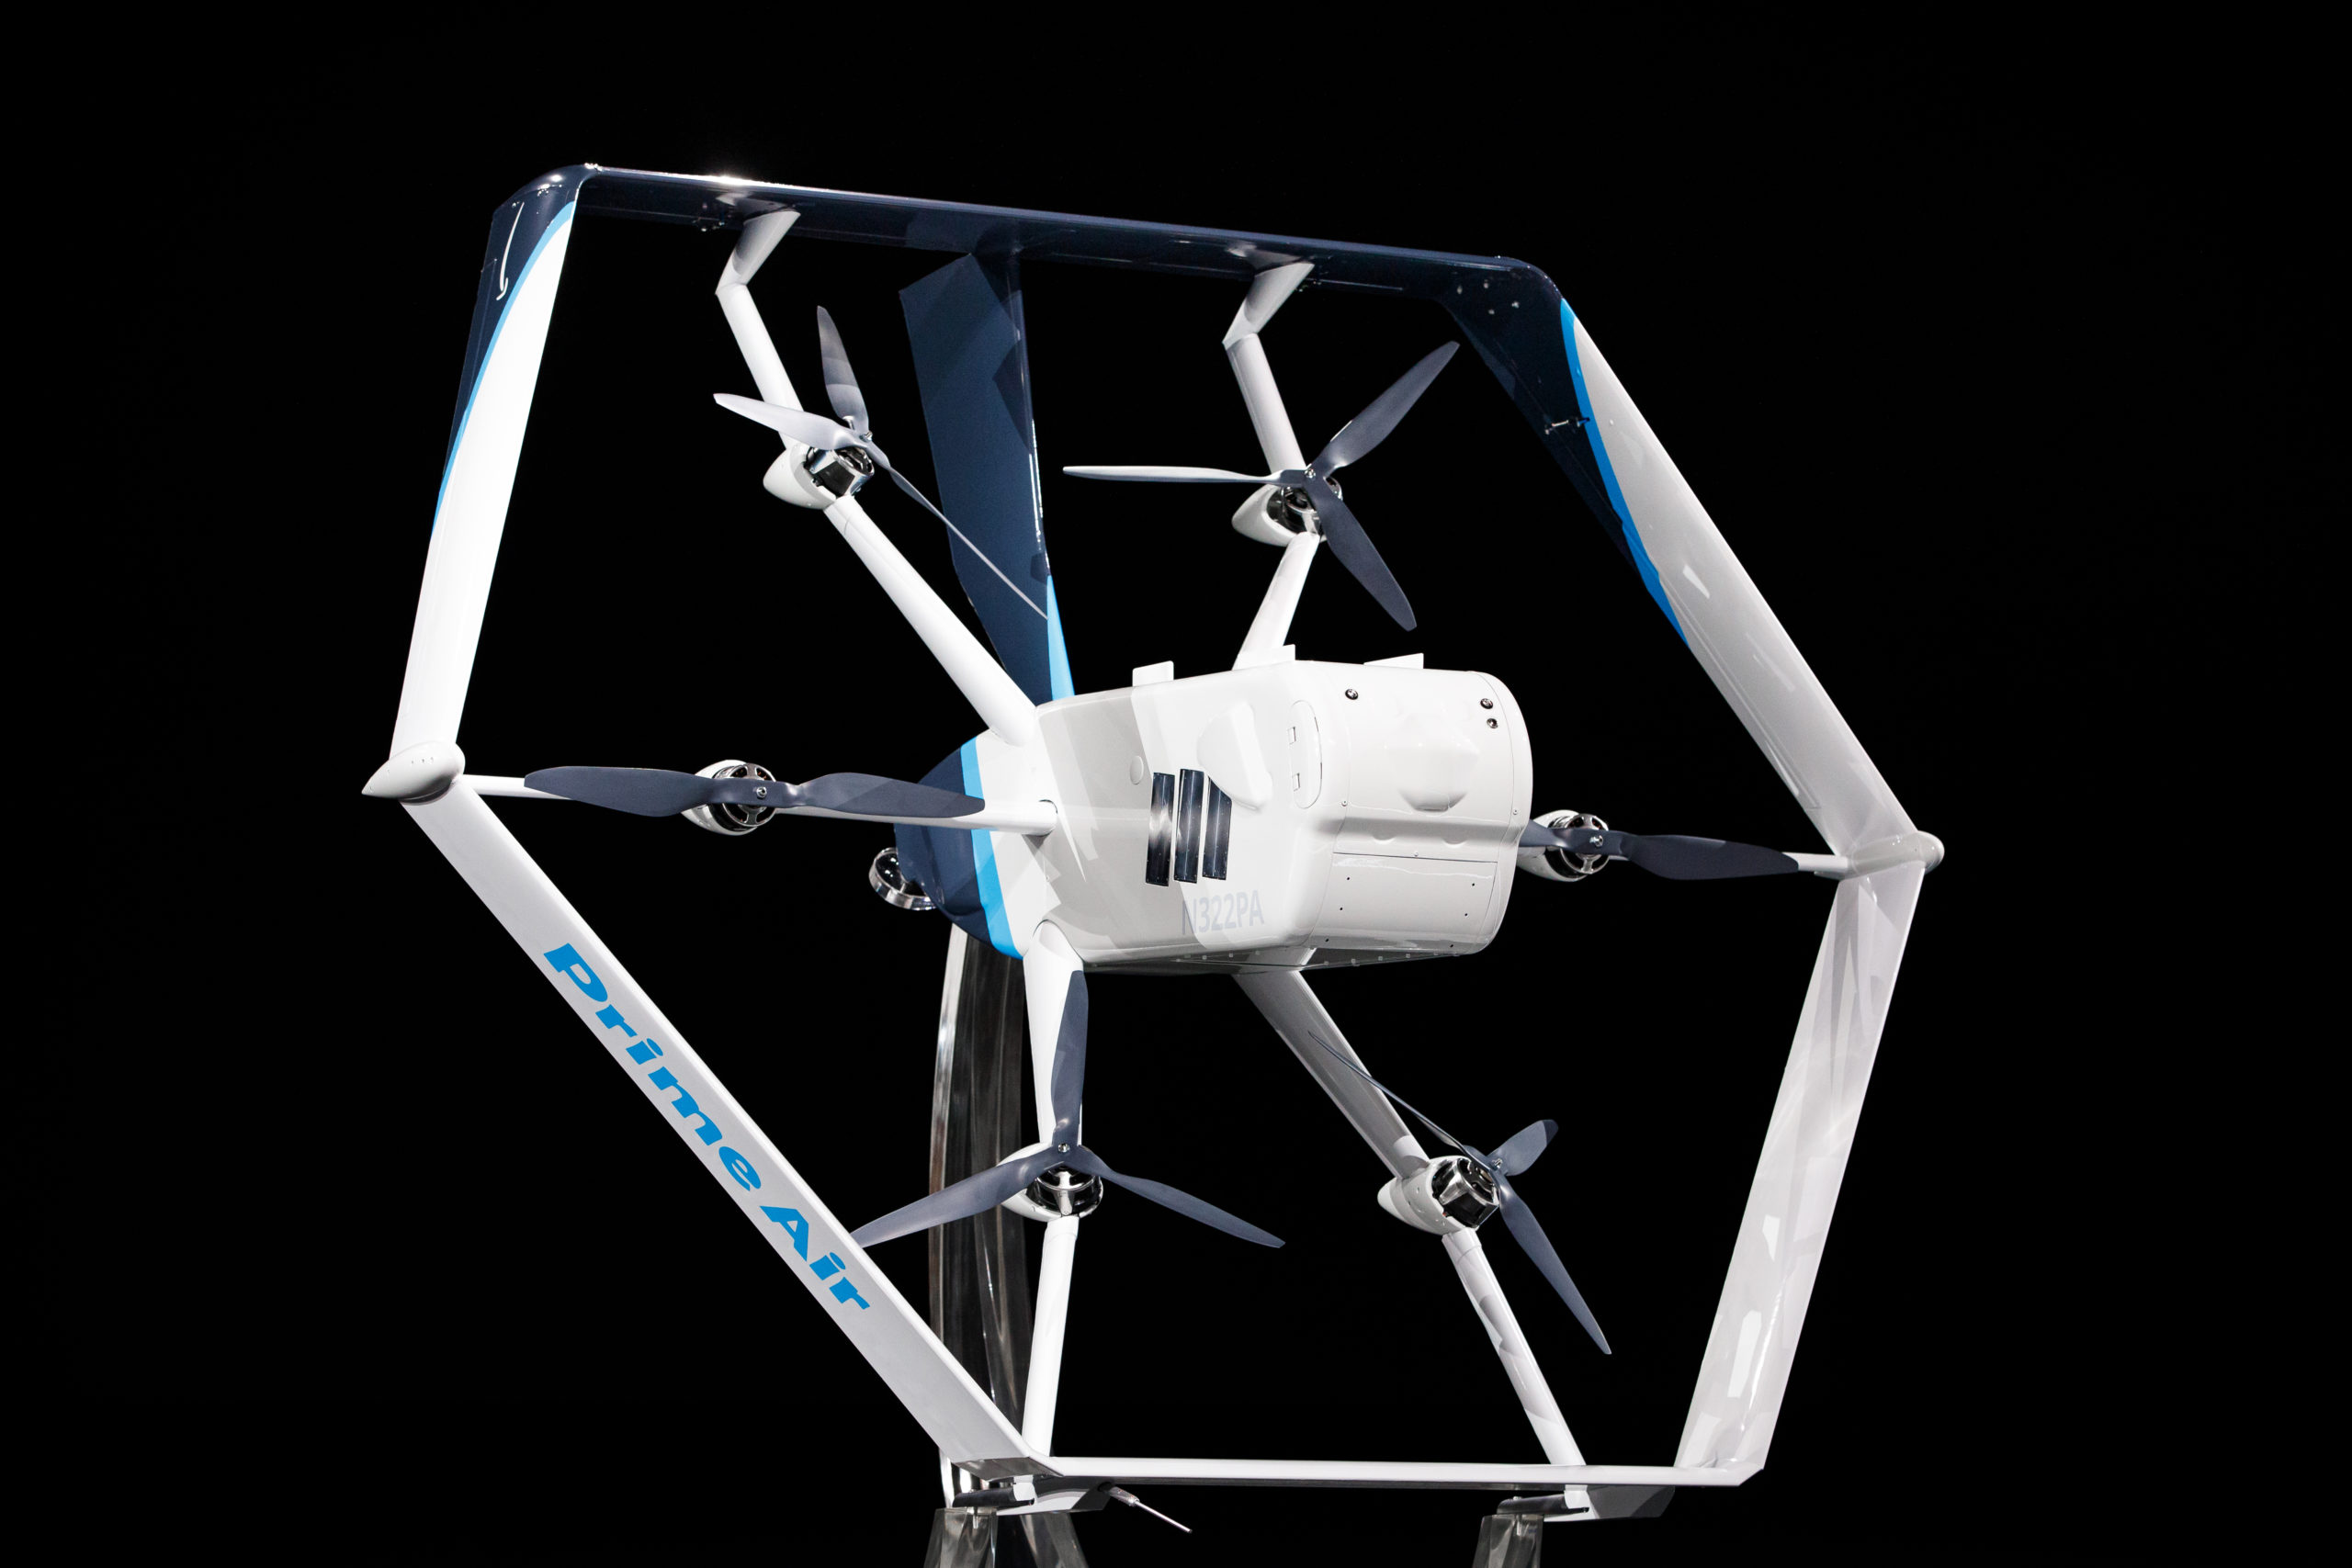 The newest Prime Air drone is equipped for vertical takeoff and landing but transitions in-flight to operate like an airplane. Photo: (JORDAN STEAD / Amazon)